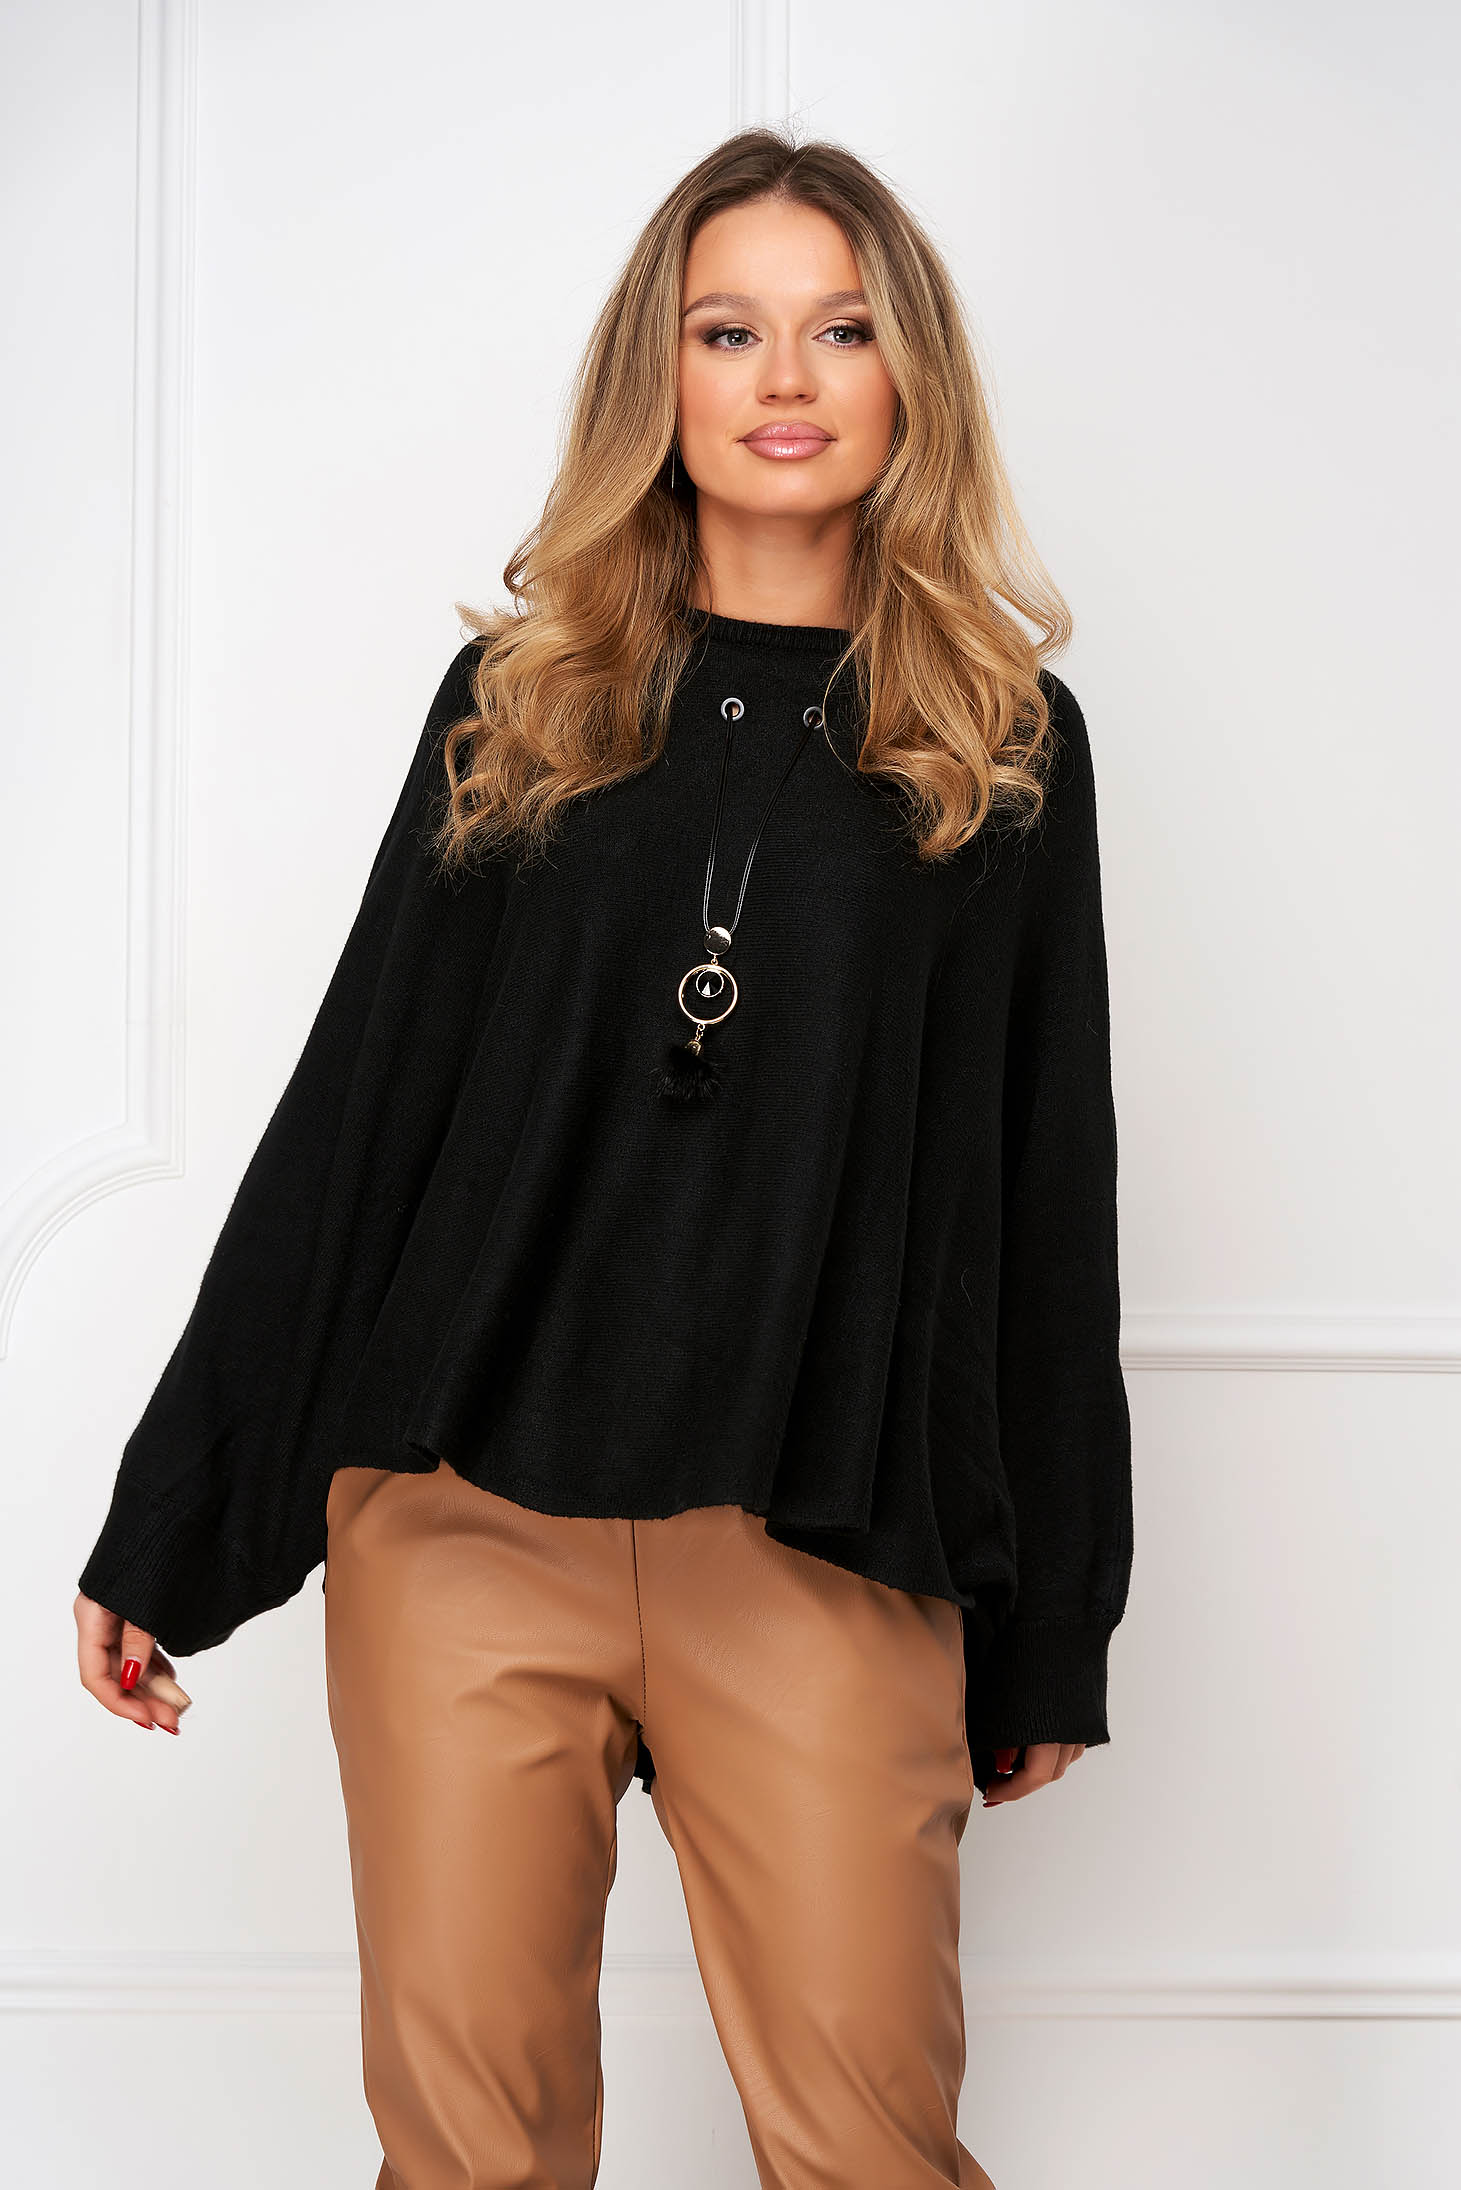 Black sweater loose fit knitted fabric accesorised with necklace